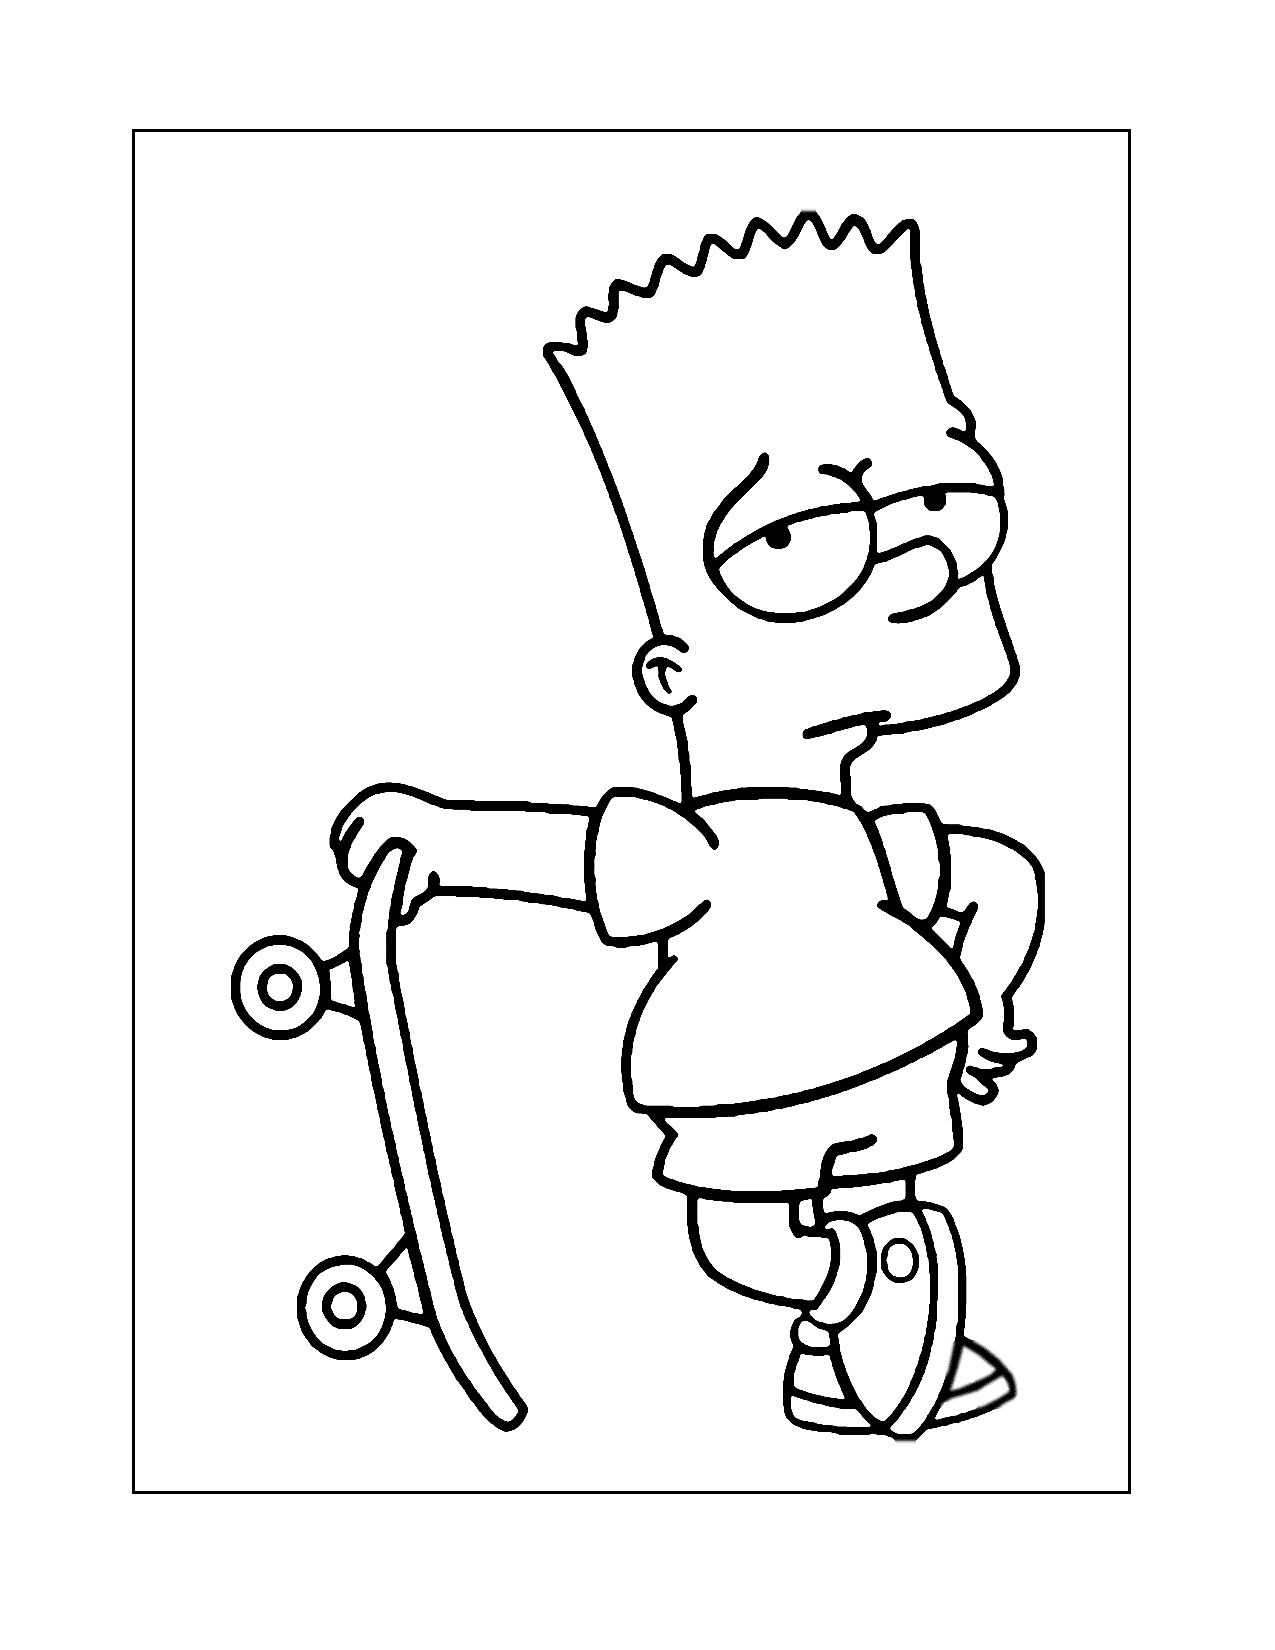 Cool Bart Simpson With Skateboard Coloring Page